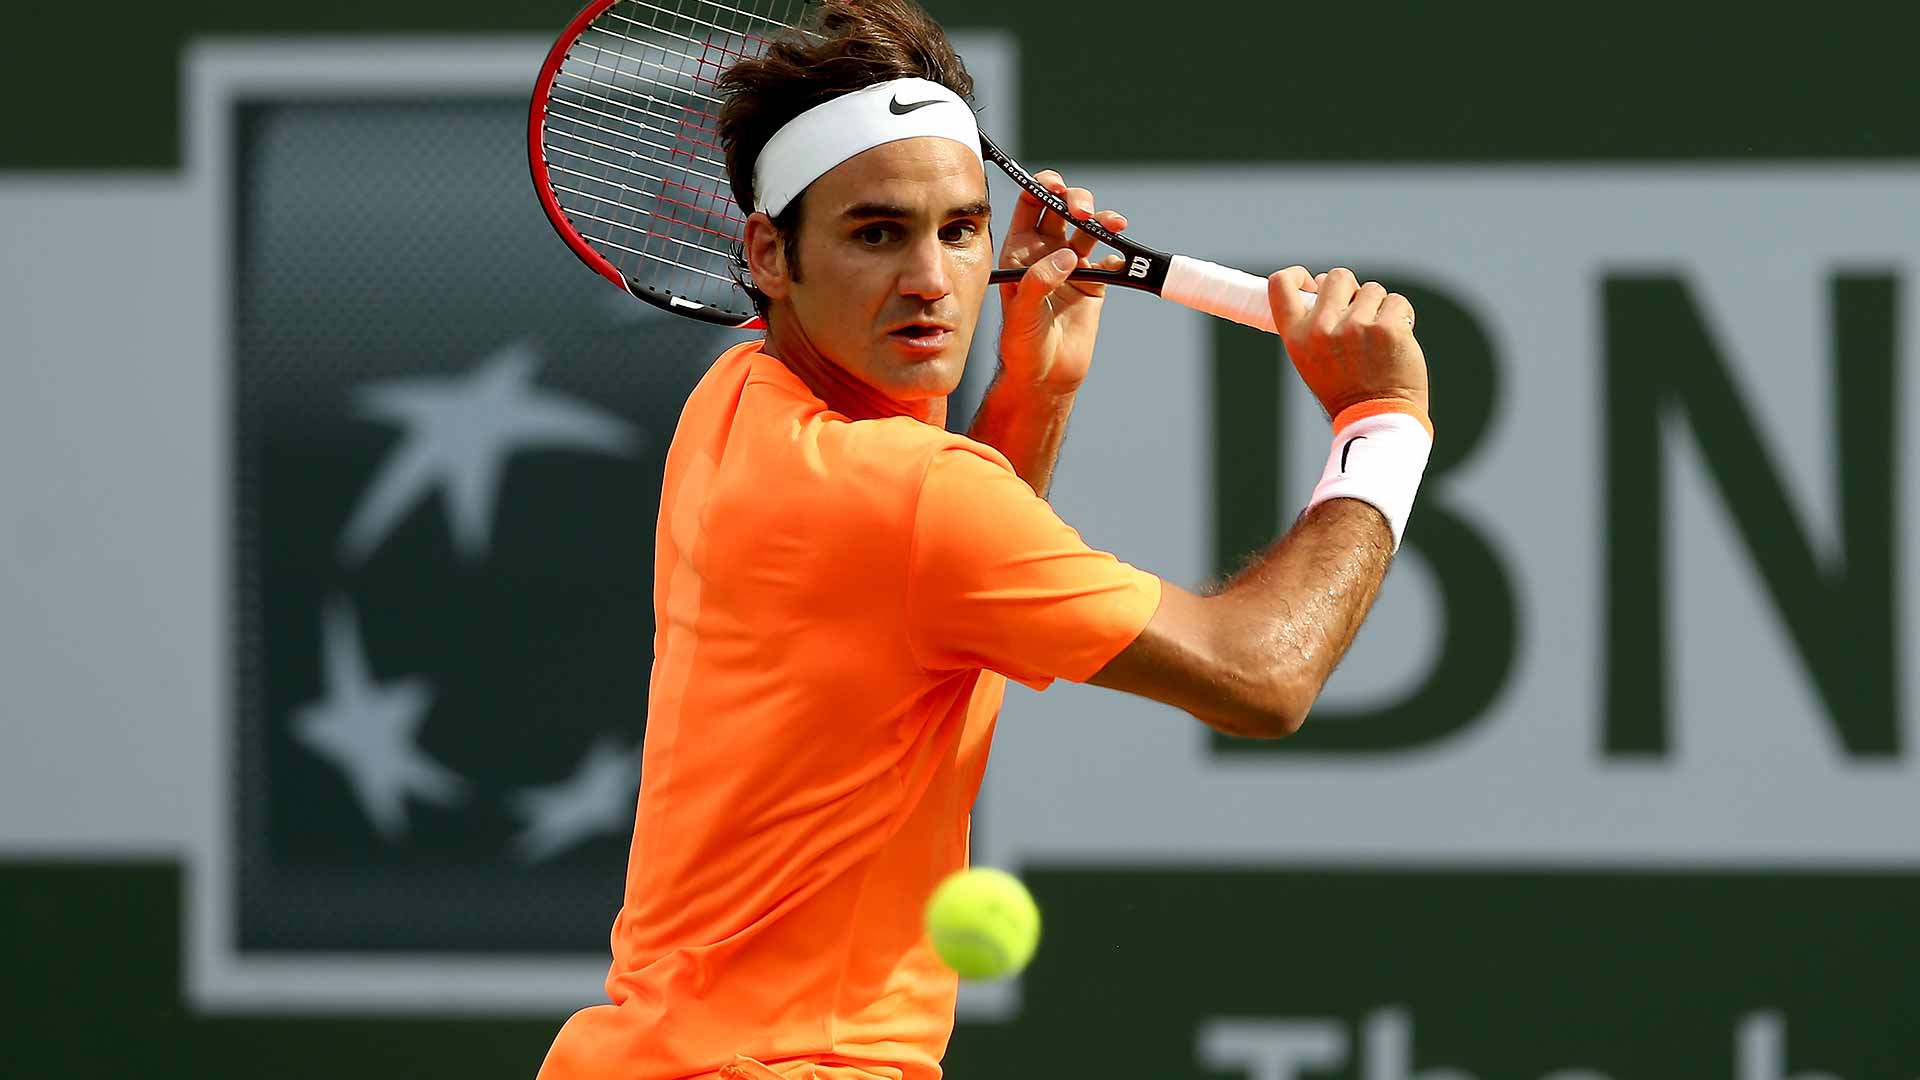 federer-indian-wells-2017-draw-preview